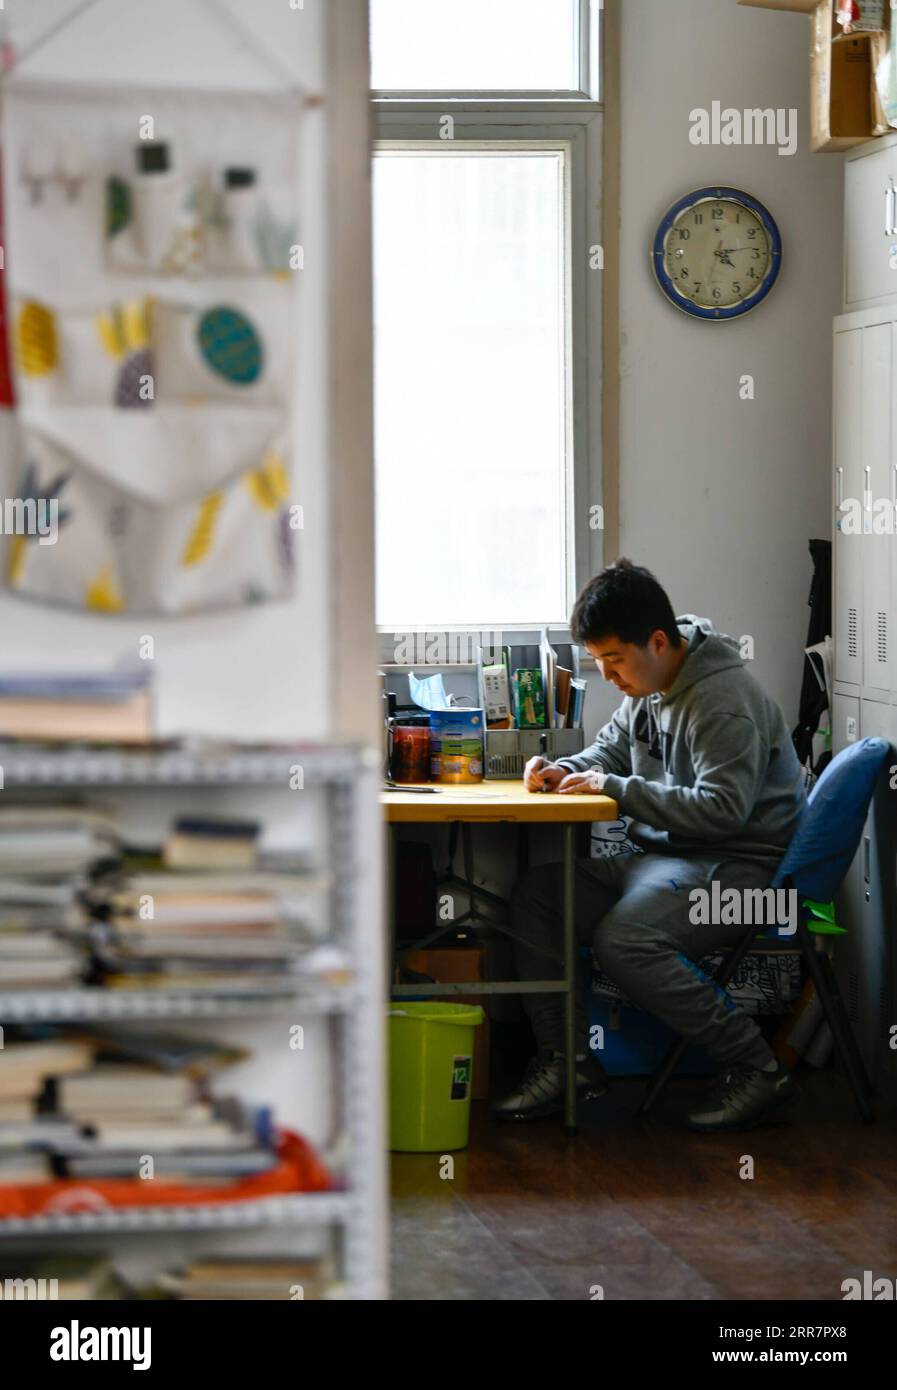 210402 -- TIANJIN, April 2, 2021 -- Zhang Hao practices writing at the autism training center set up by his mother Wu Guixiang in Hedong District, north China s Tianjin, March 30, 2021. In 1998, Zhang Hao was diagnosed with autism at the age of two. Ever since the diagnosis, Zhang s mother Wu Guixiang has spent all her time looking after her son. In order to help Zhang Hao and eight others with autism improve their social engagement after they had become grown-ups, Wu set up an autism training center in 2016, providing them with courses on life, social and vocational skills. Within five years, Stock Photo